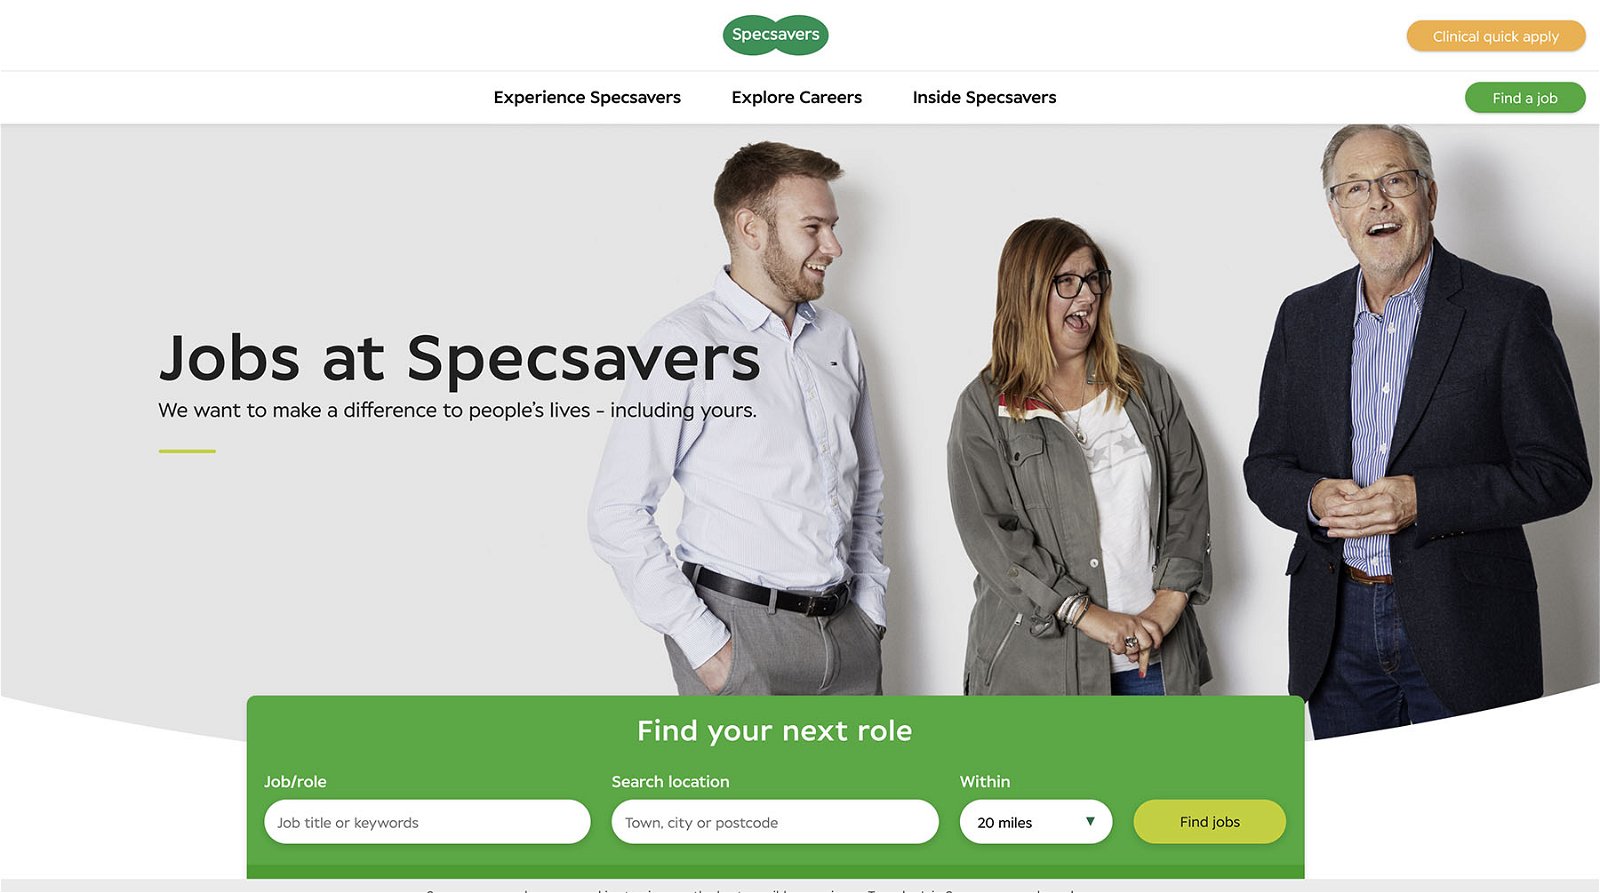 Header section of Specsavers' dedicated careers website.